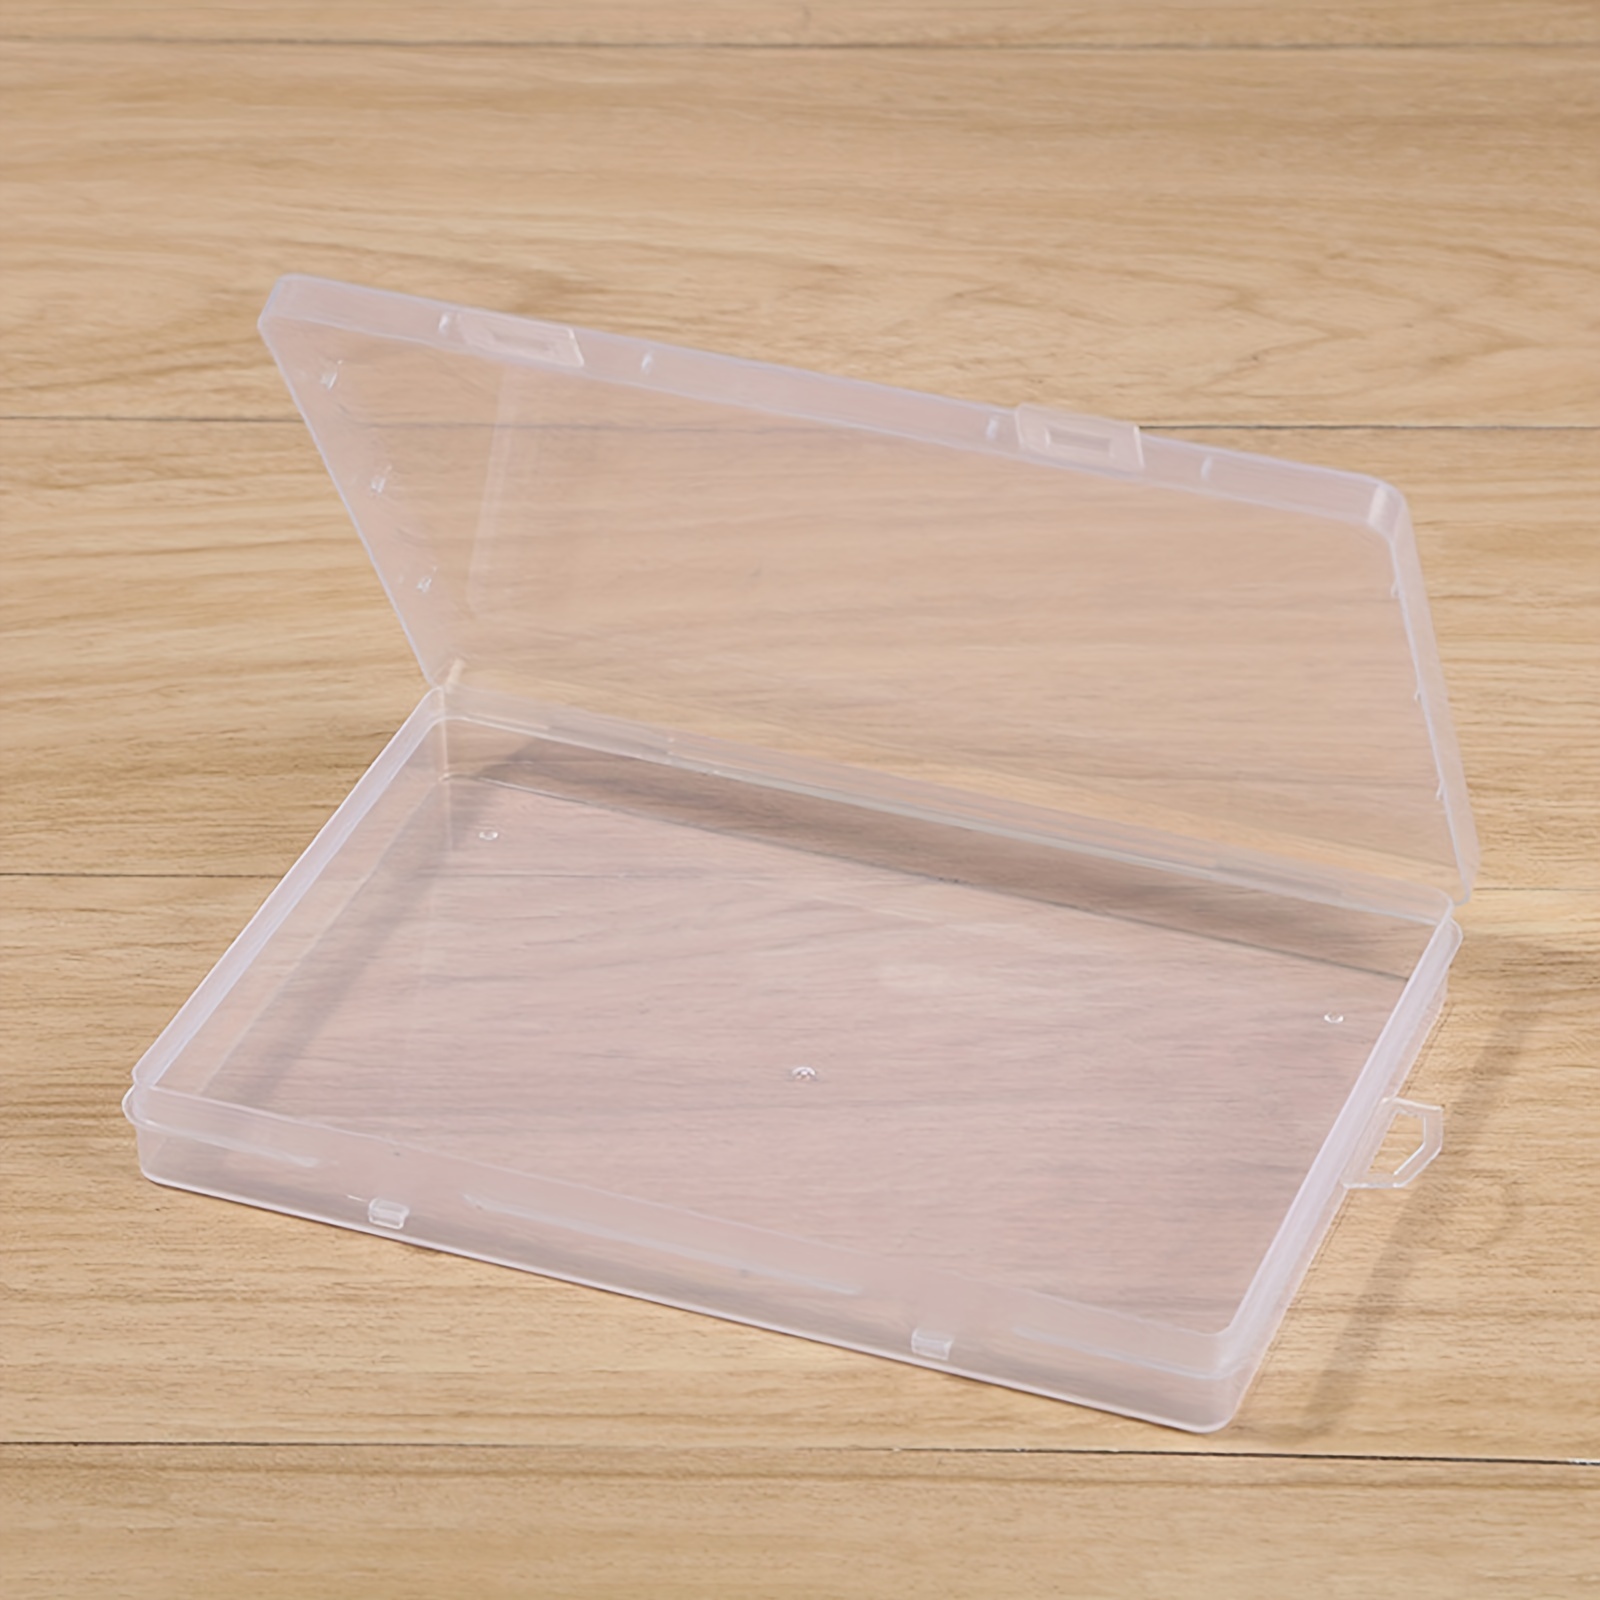 

1pc Clear Rectangular Plastic Storage Box For Jewelry, Electronics, Stationery, Cutlery, And Fishing Hooks - Organize And Protect Your Items